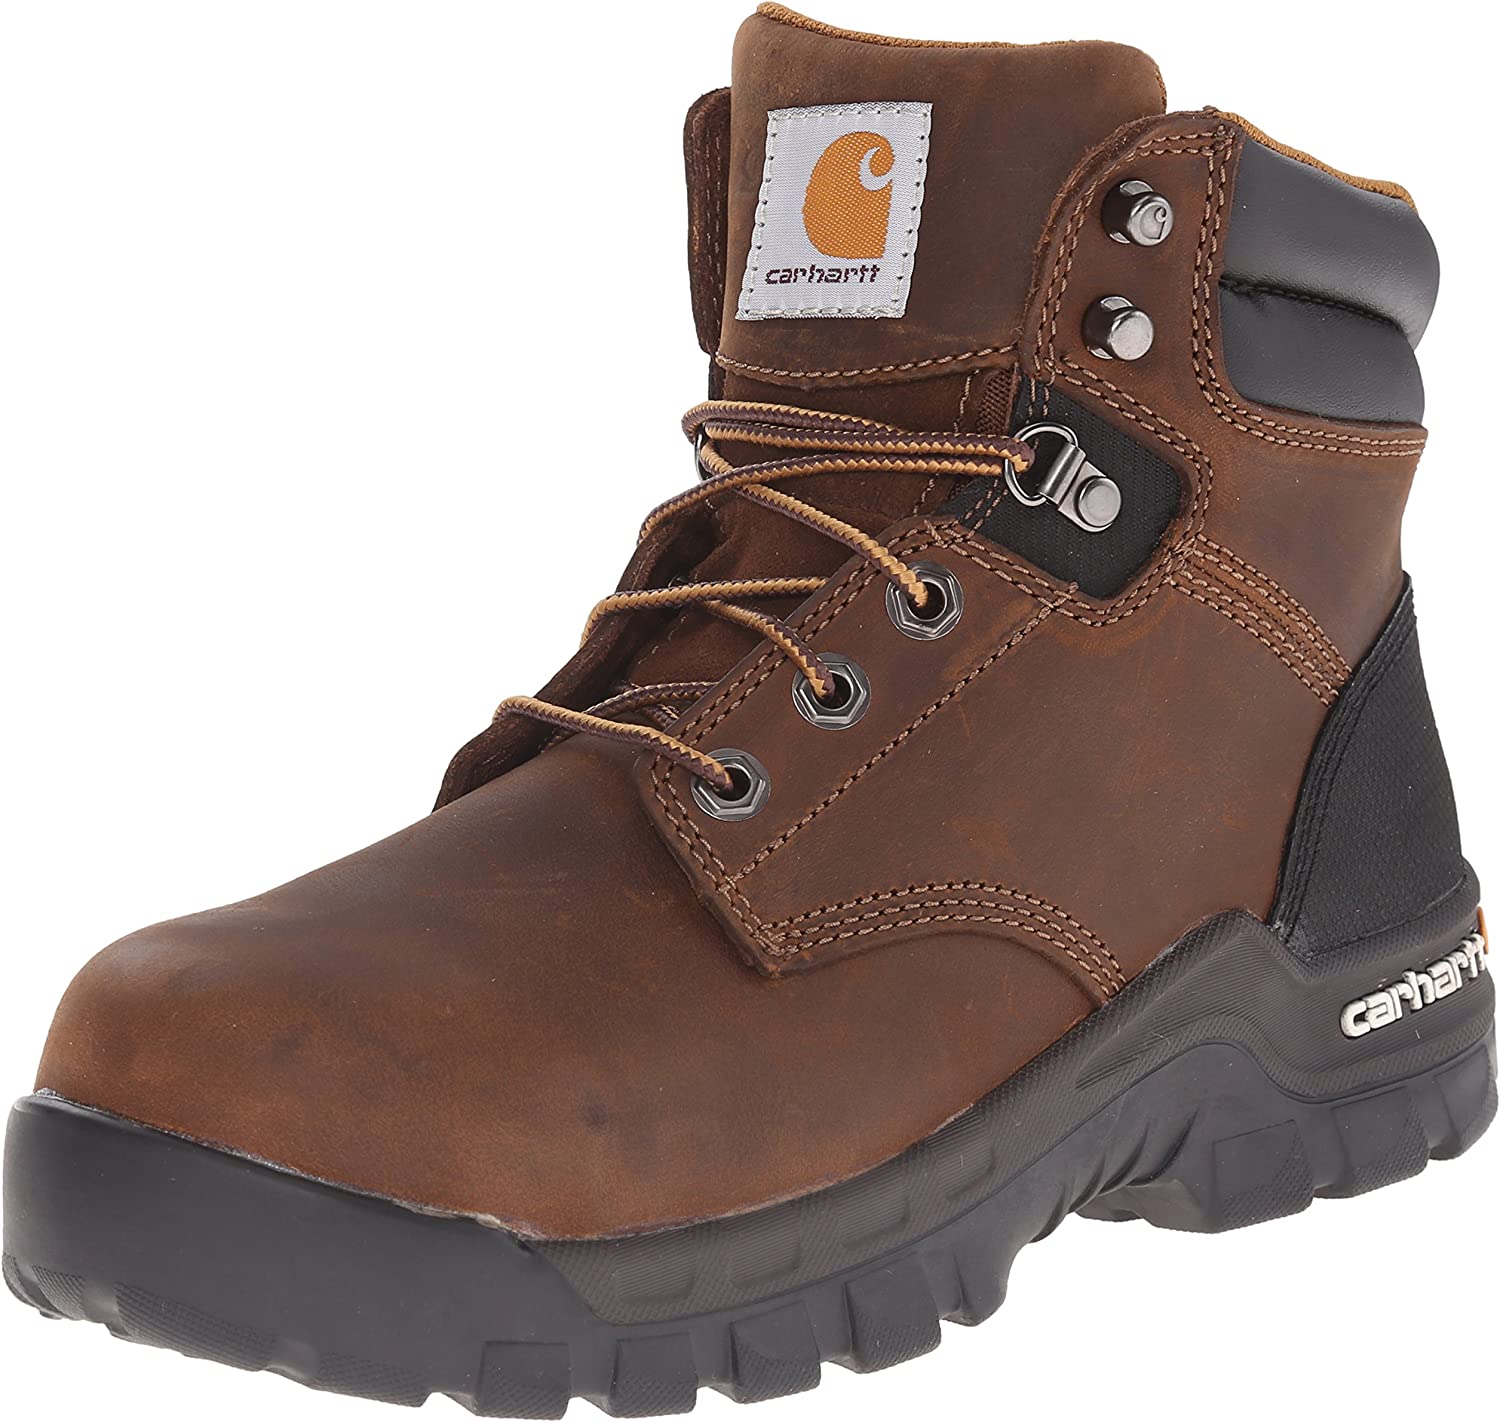 Rugged Flex 6" Composite Toe Work Boot in Brown Oil Tanned from the size view